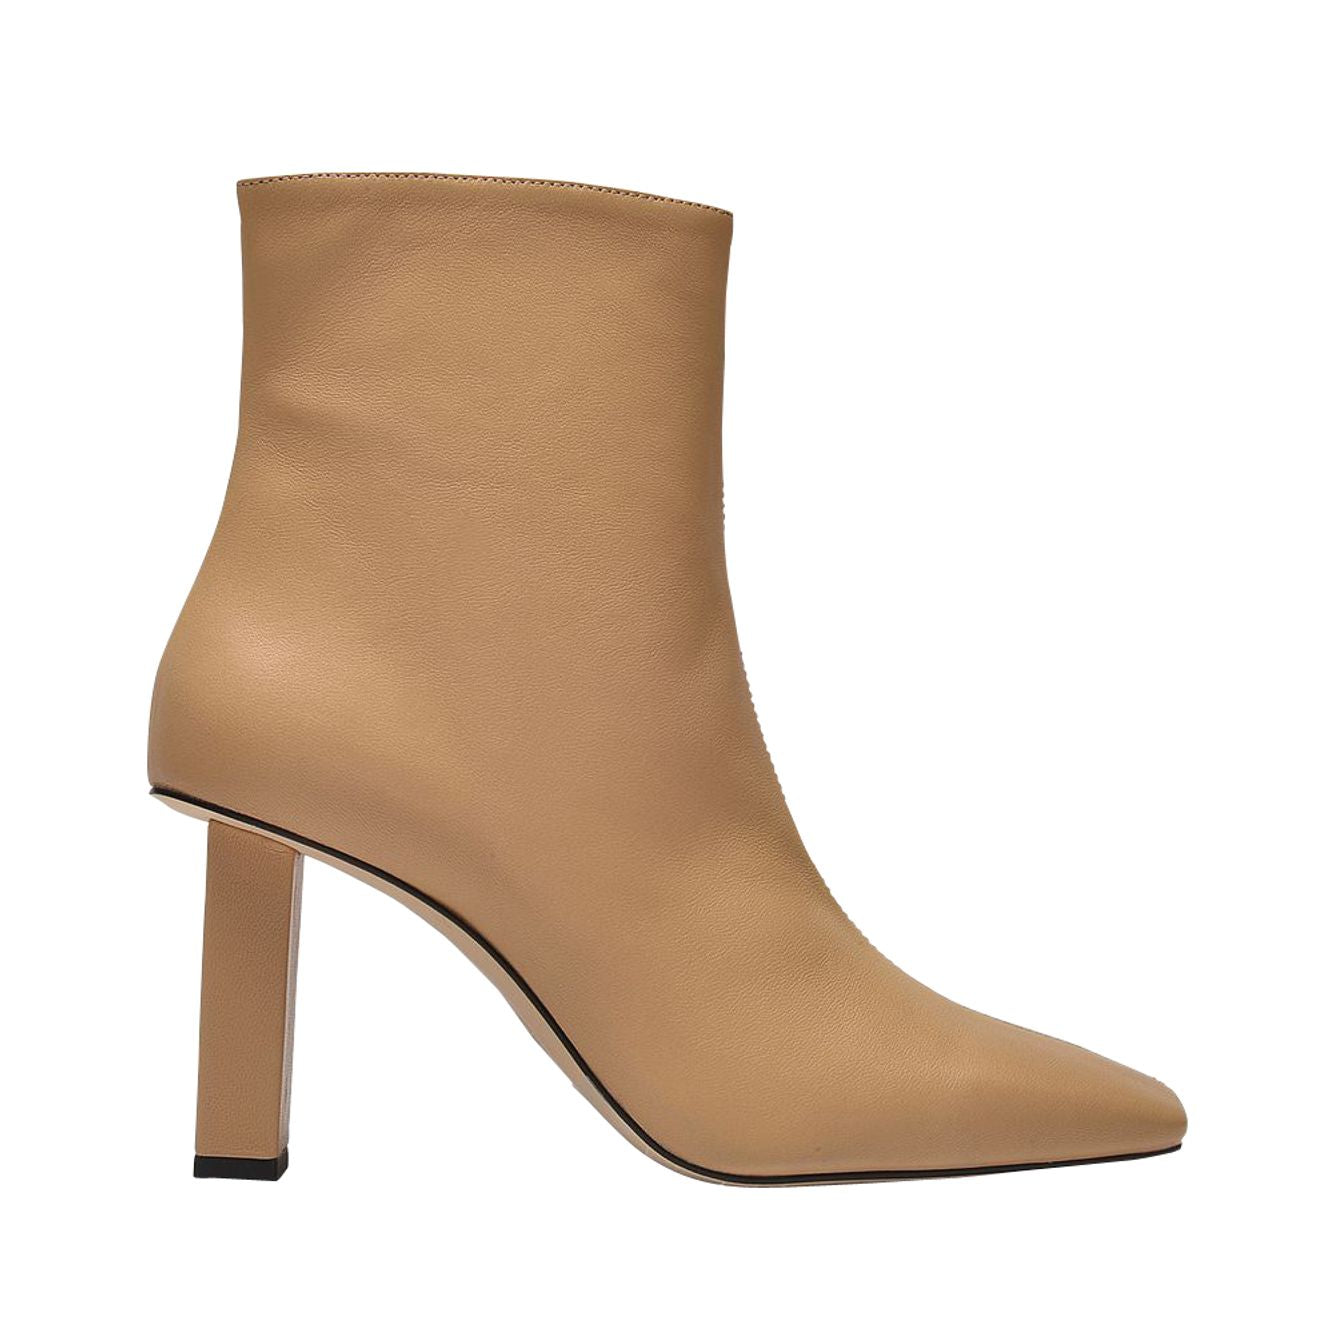 ANNY NORD JOAN LE CARRÉ ANKLE BOOTS IN LIGHT SAND LEATHER